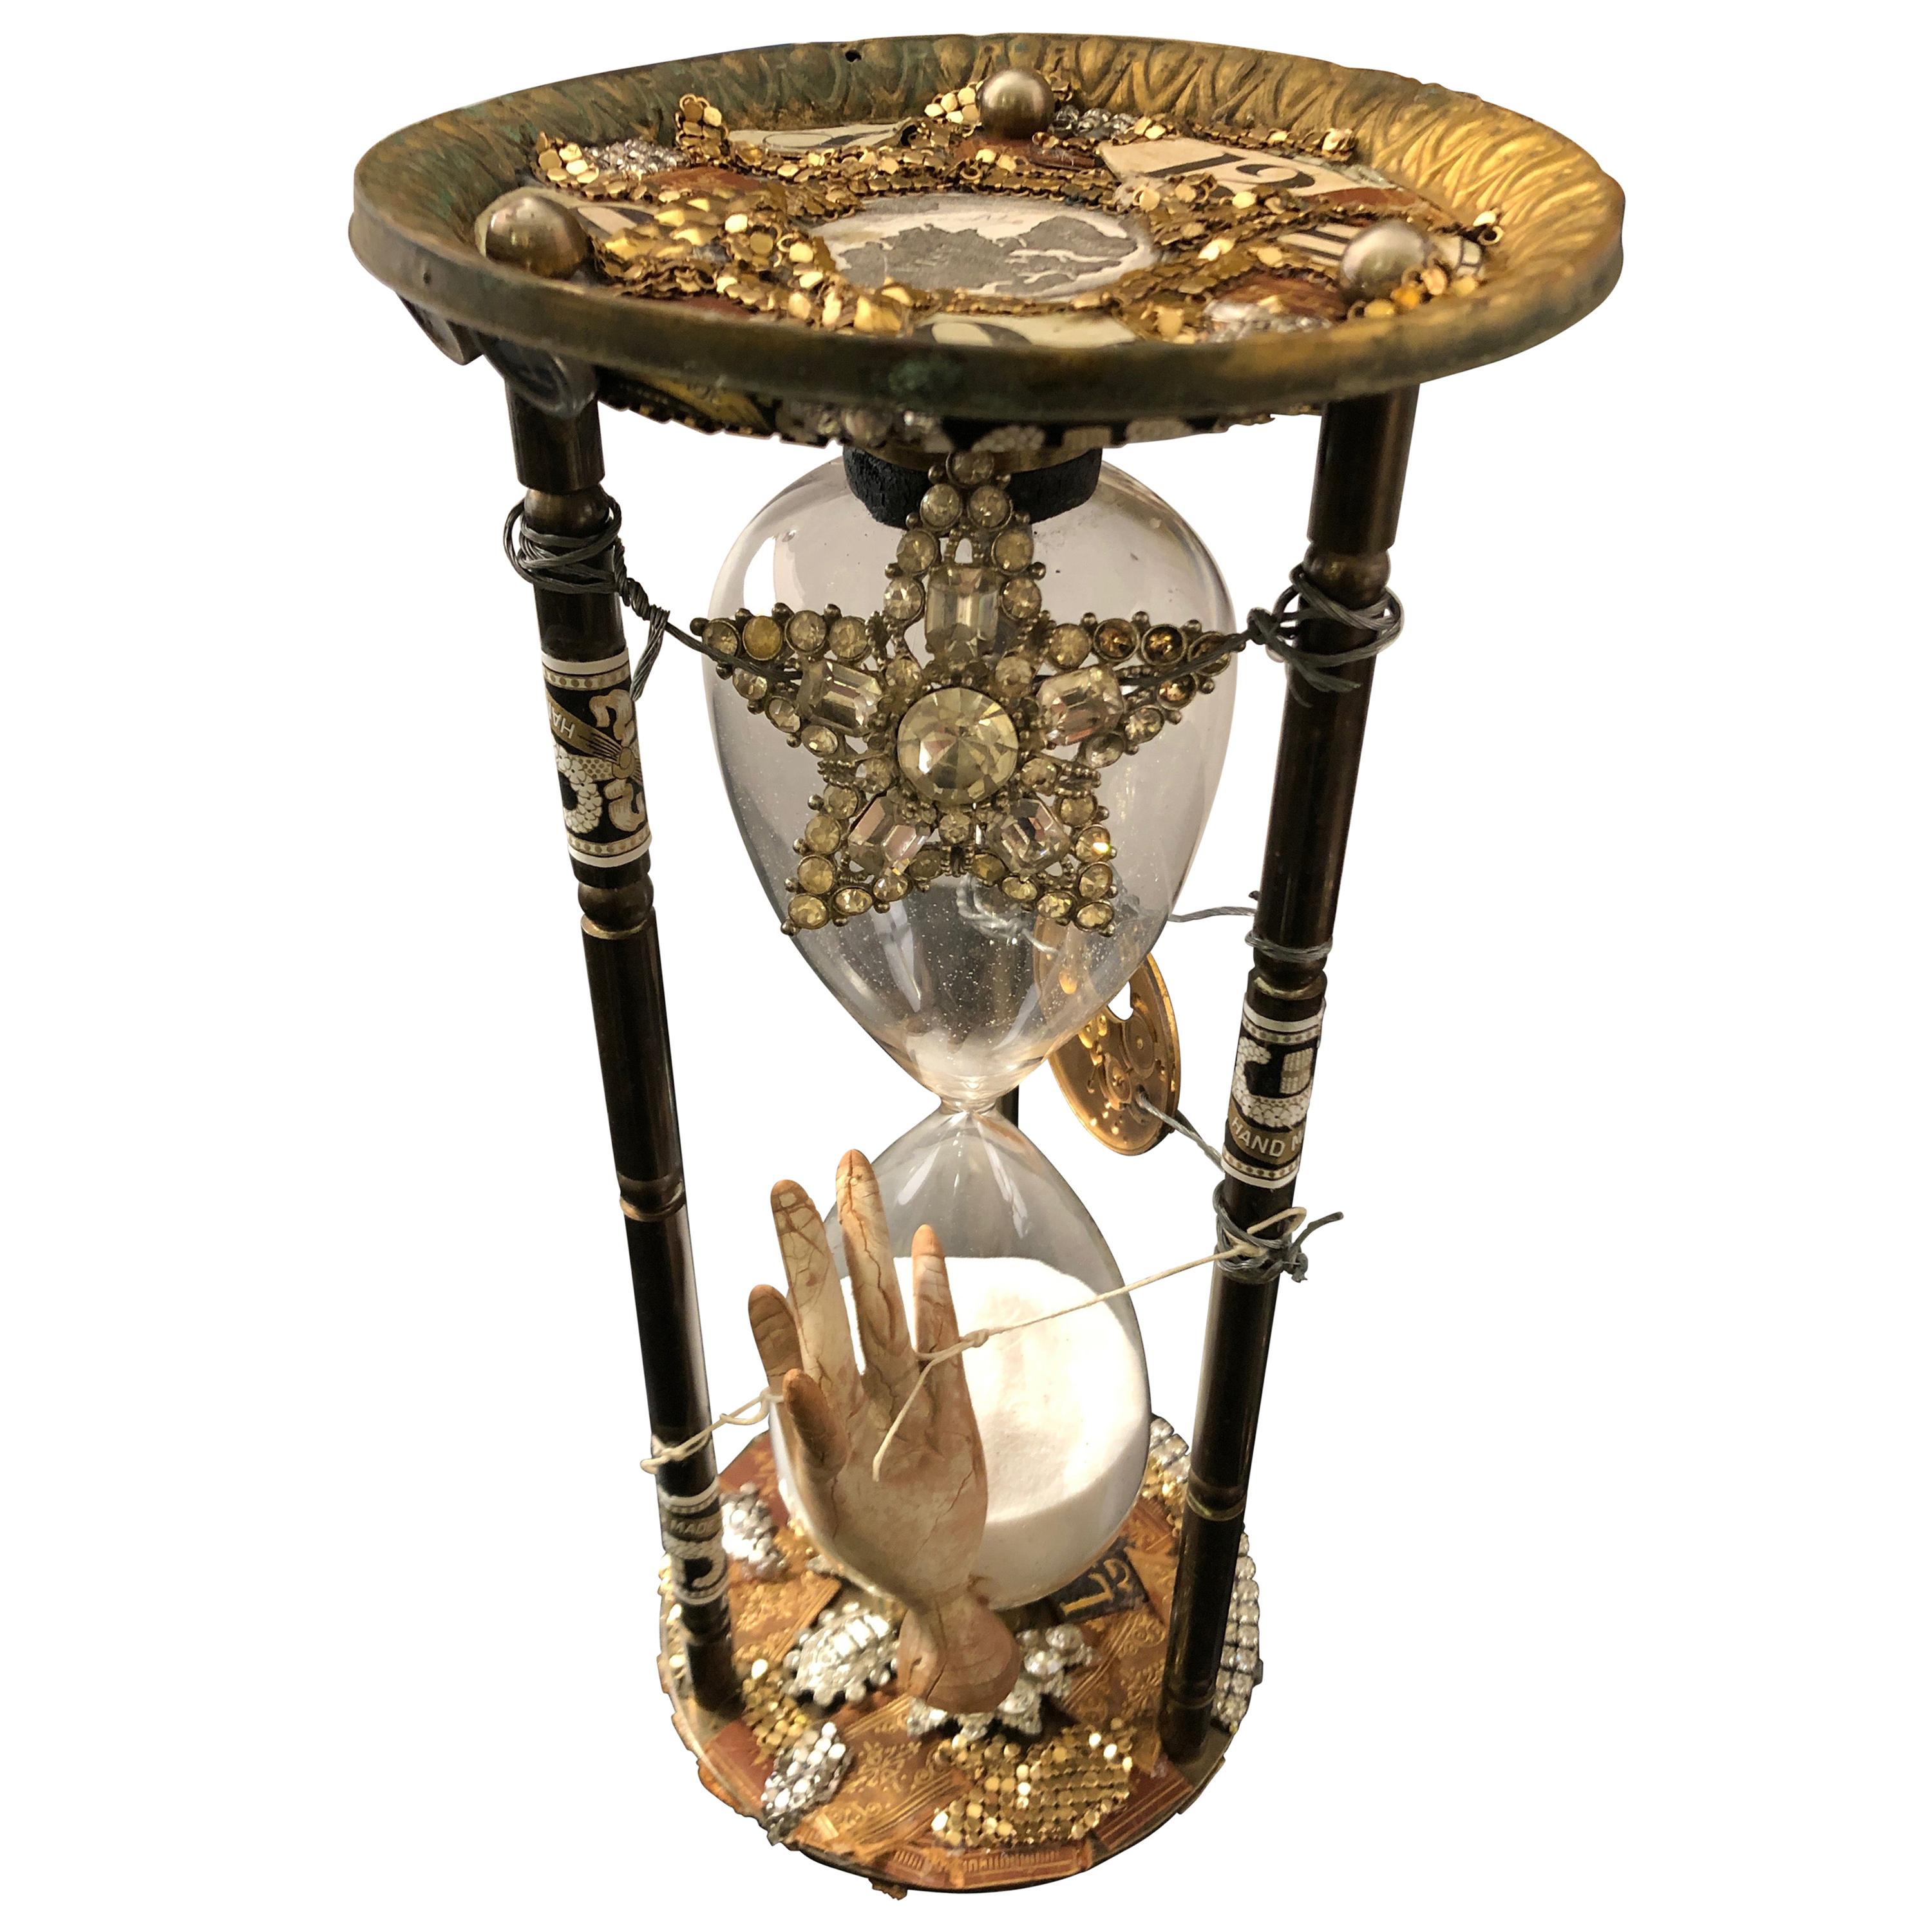 Extraordinary Hourglass Sculpture with Meticulous Artistry For Sale